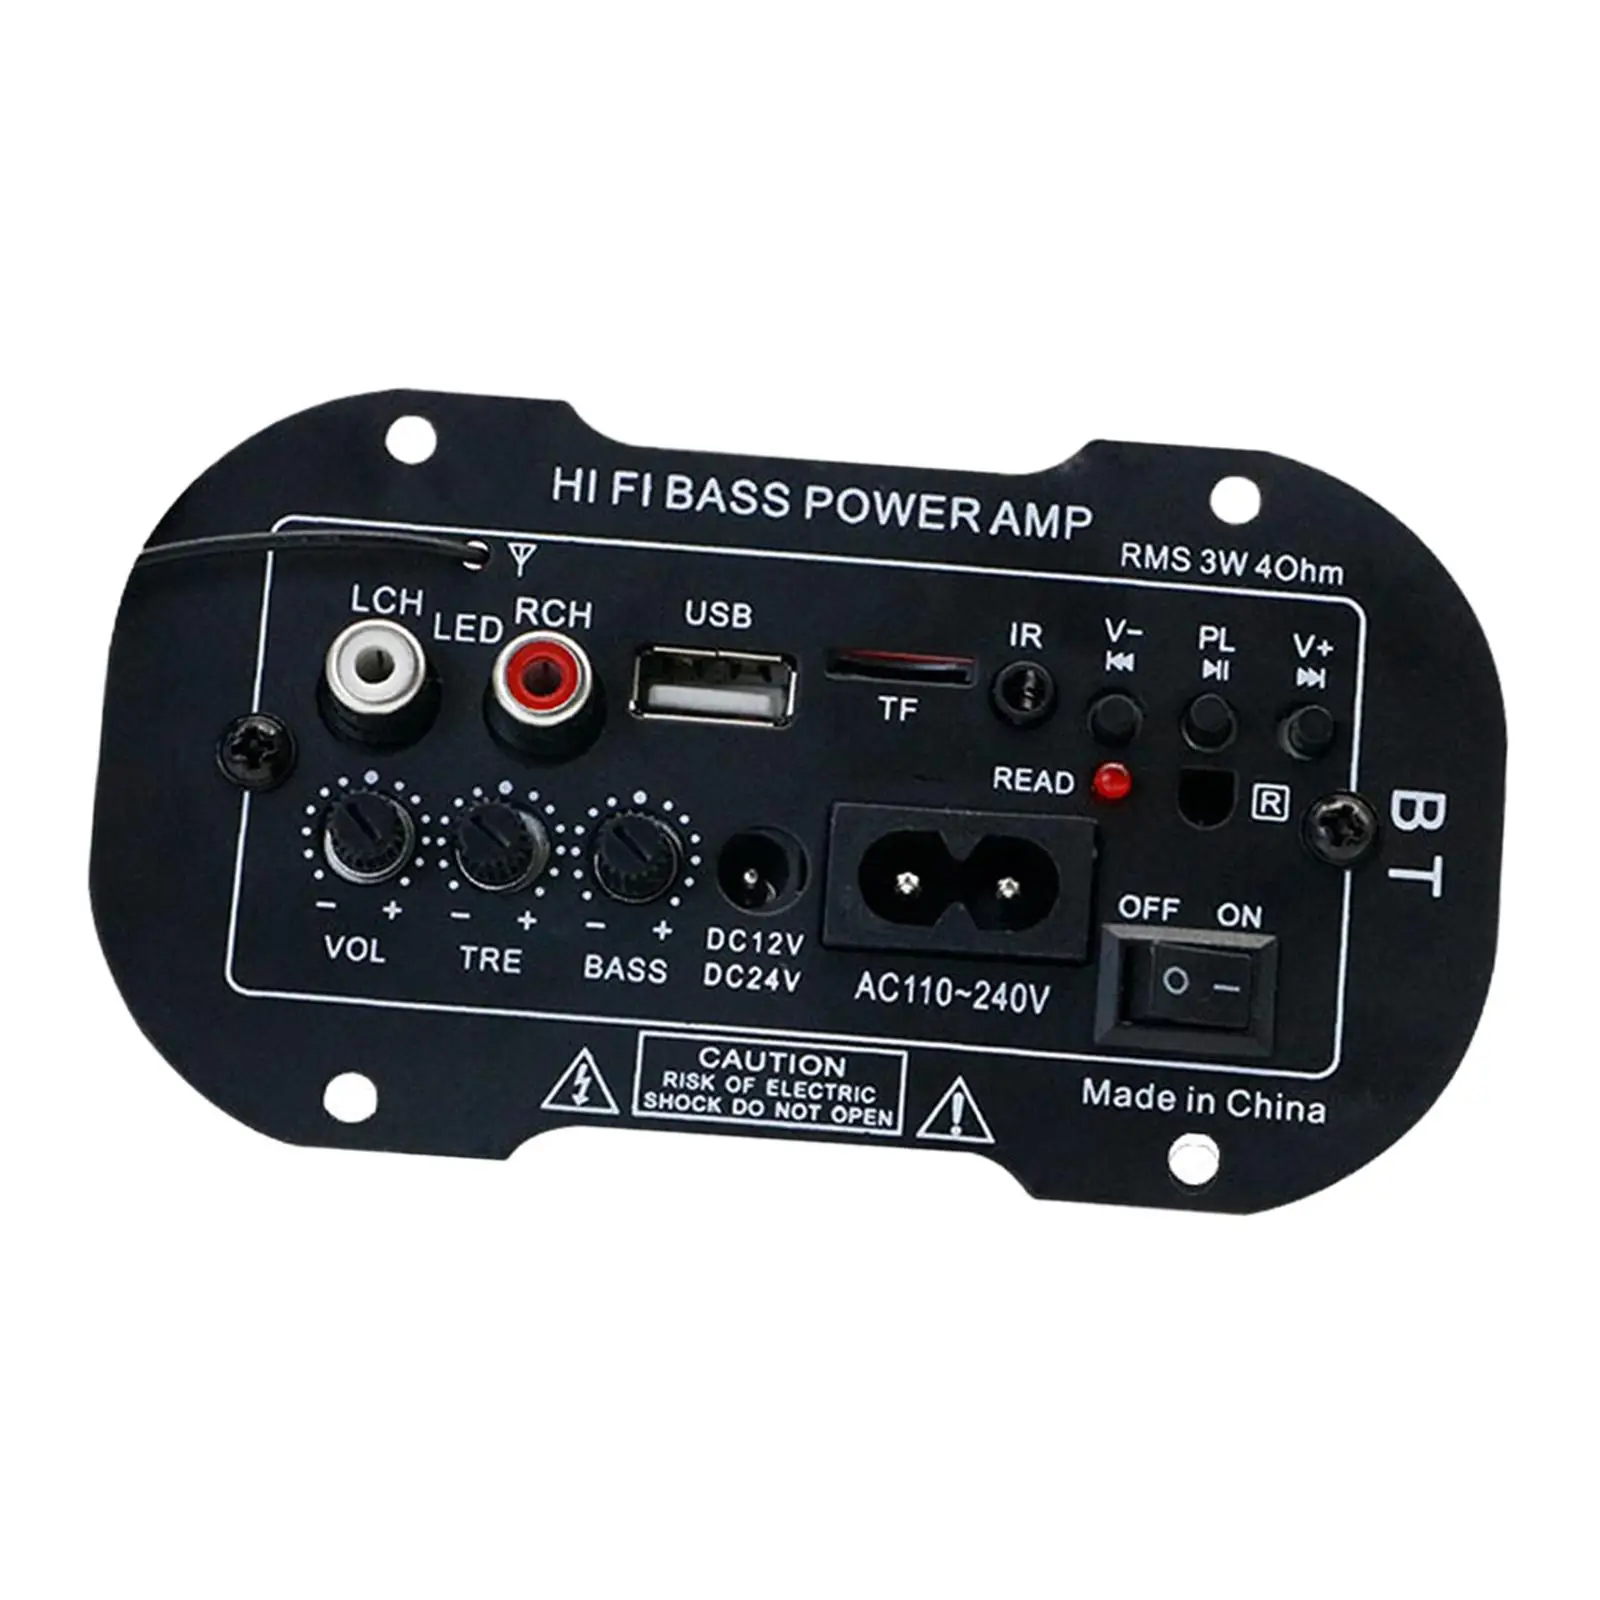 Subwoofer Power Amplifier Board EU Adapter Audio Stereo Single Channel HiFi with Remote Control for Car DIY Store Home Theater